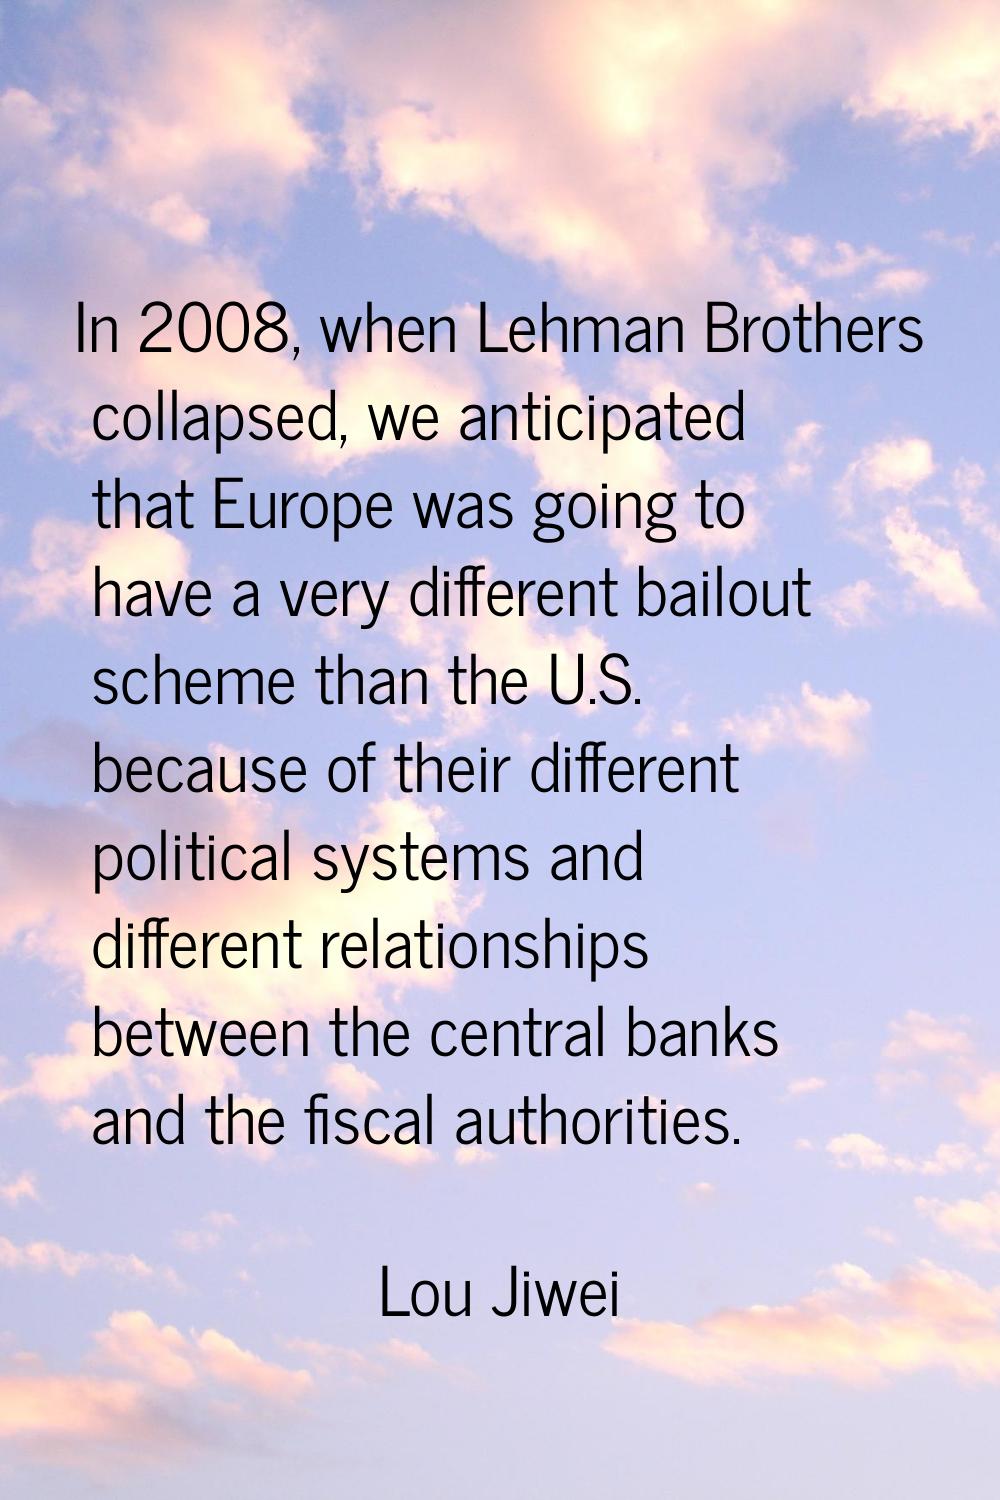 In 2008, when Lehman Brothers collapsed, we anticipated that Europe was going to have a very differ